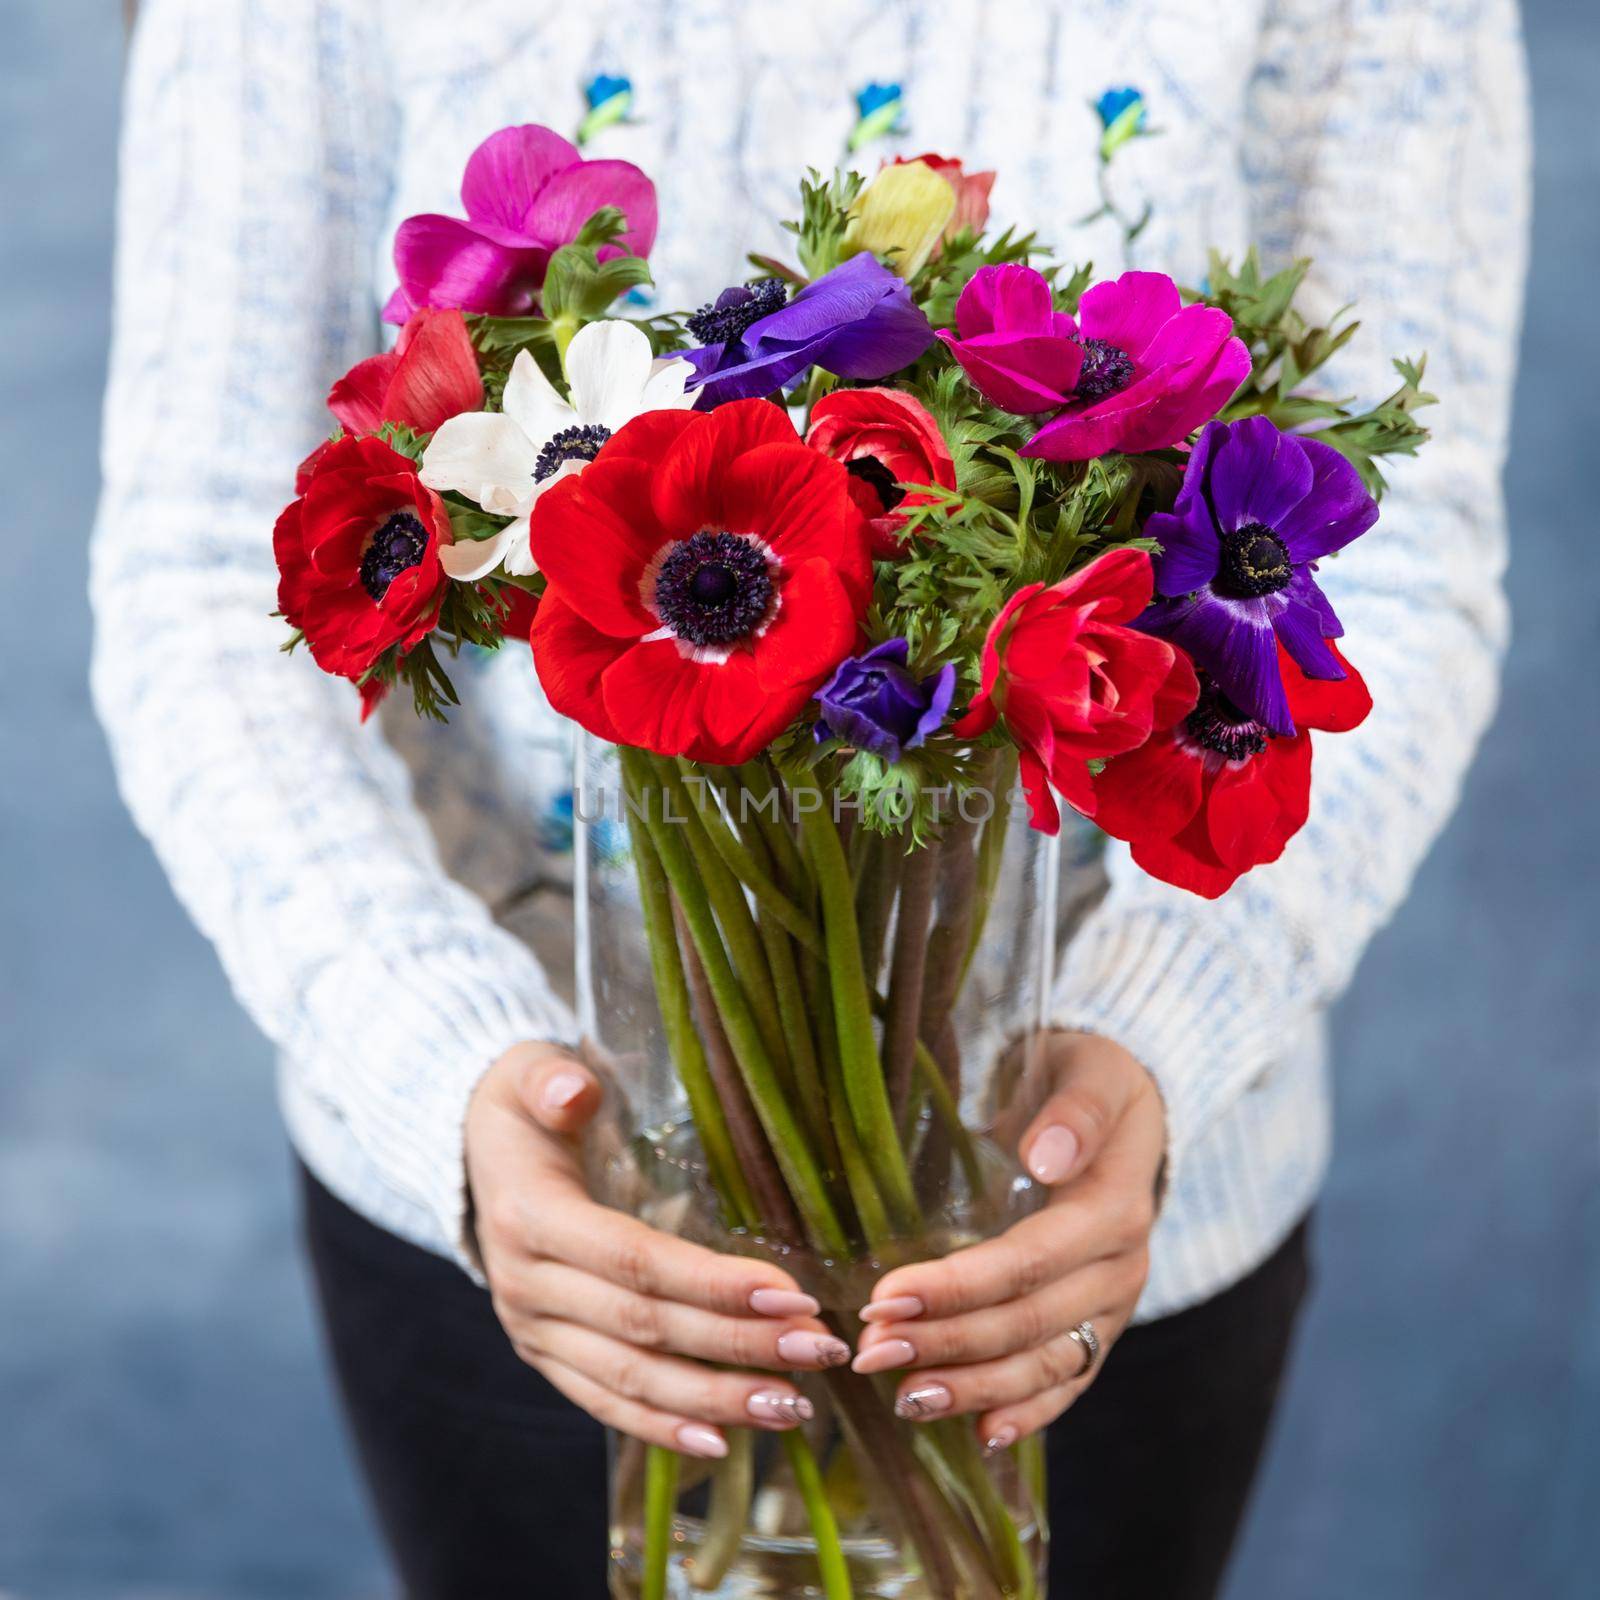 Woman holding red, magenta, pink Papaver rhoeas, Common poppy flower bouquet